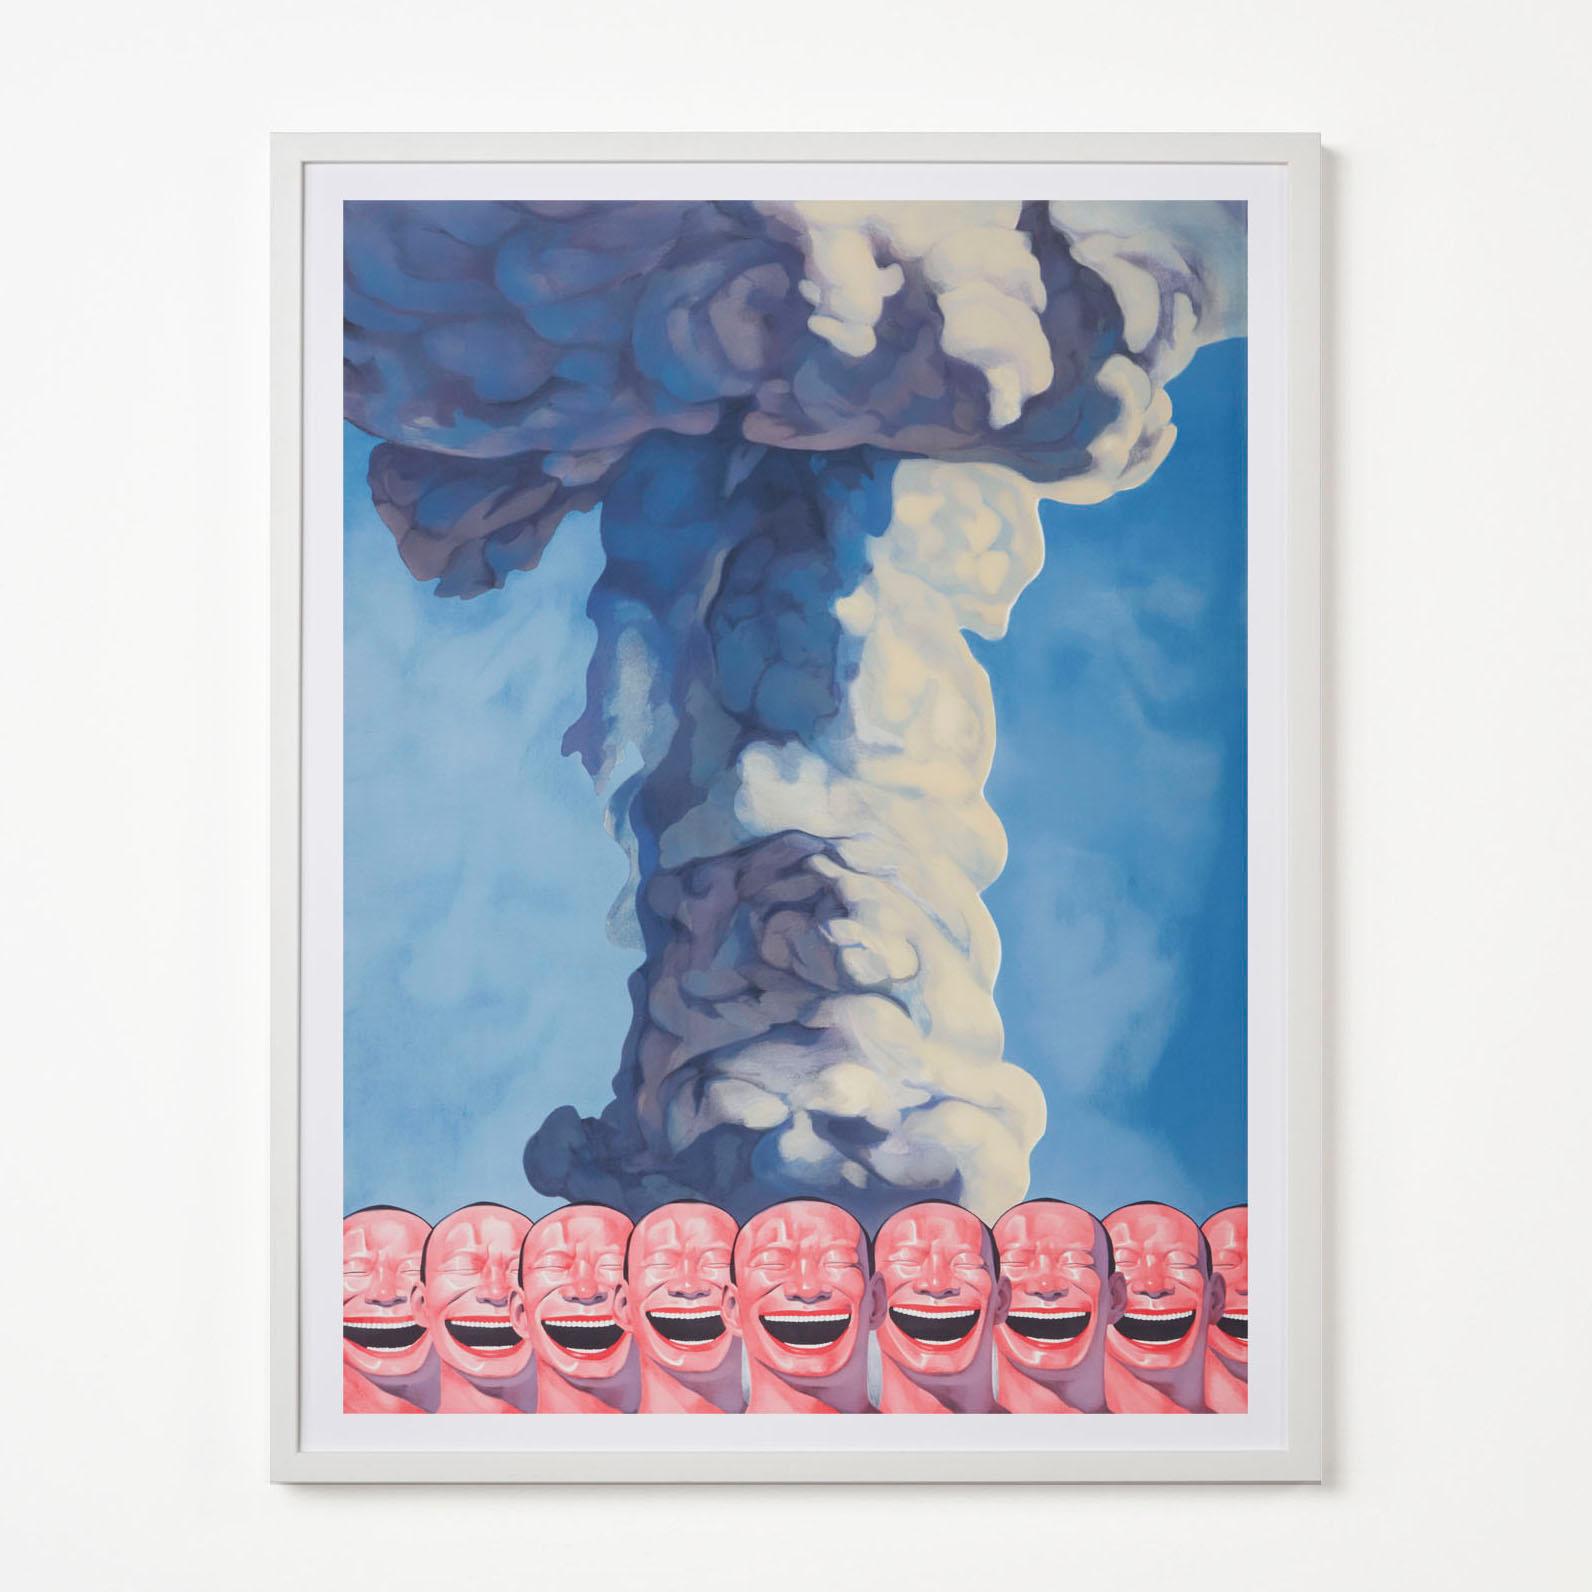 Mushroom Cloud, Yue Minjun- Art, Lithograph, Limited Edition, Chinese For Sale 5